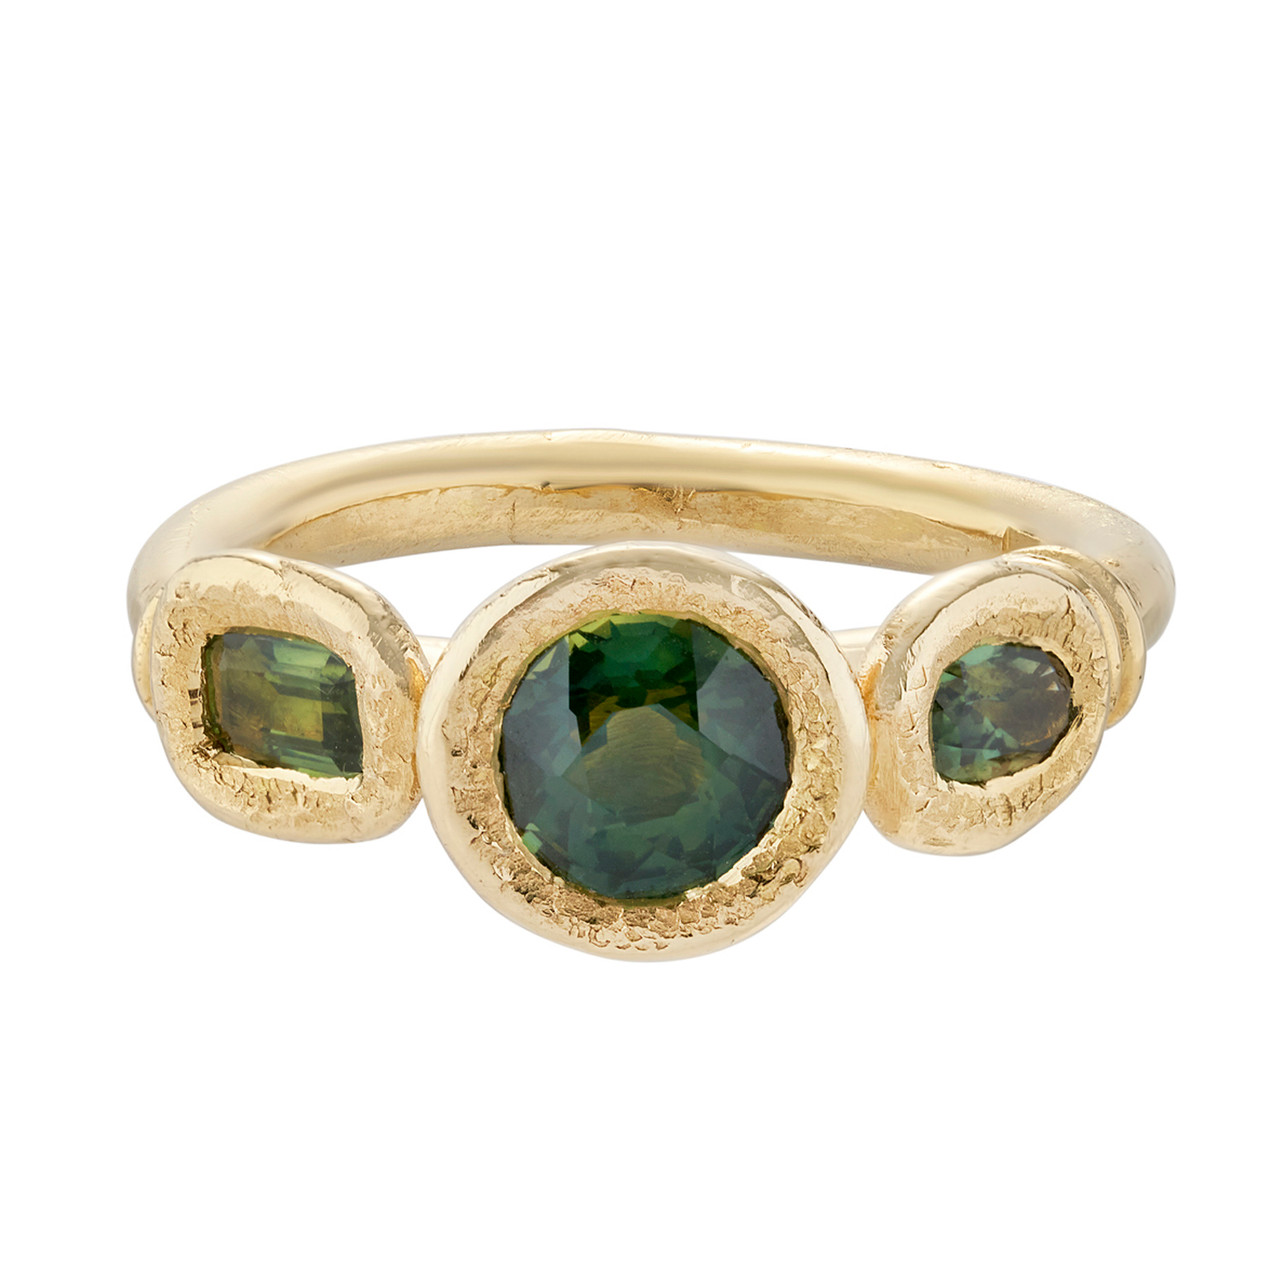 Insieme Sapphire & 18ct Yellow Gold Ring, Mia Chicco, tomfoolery